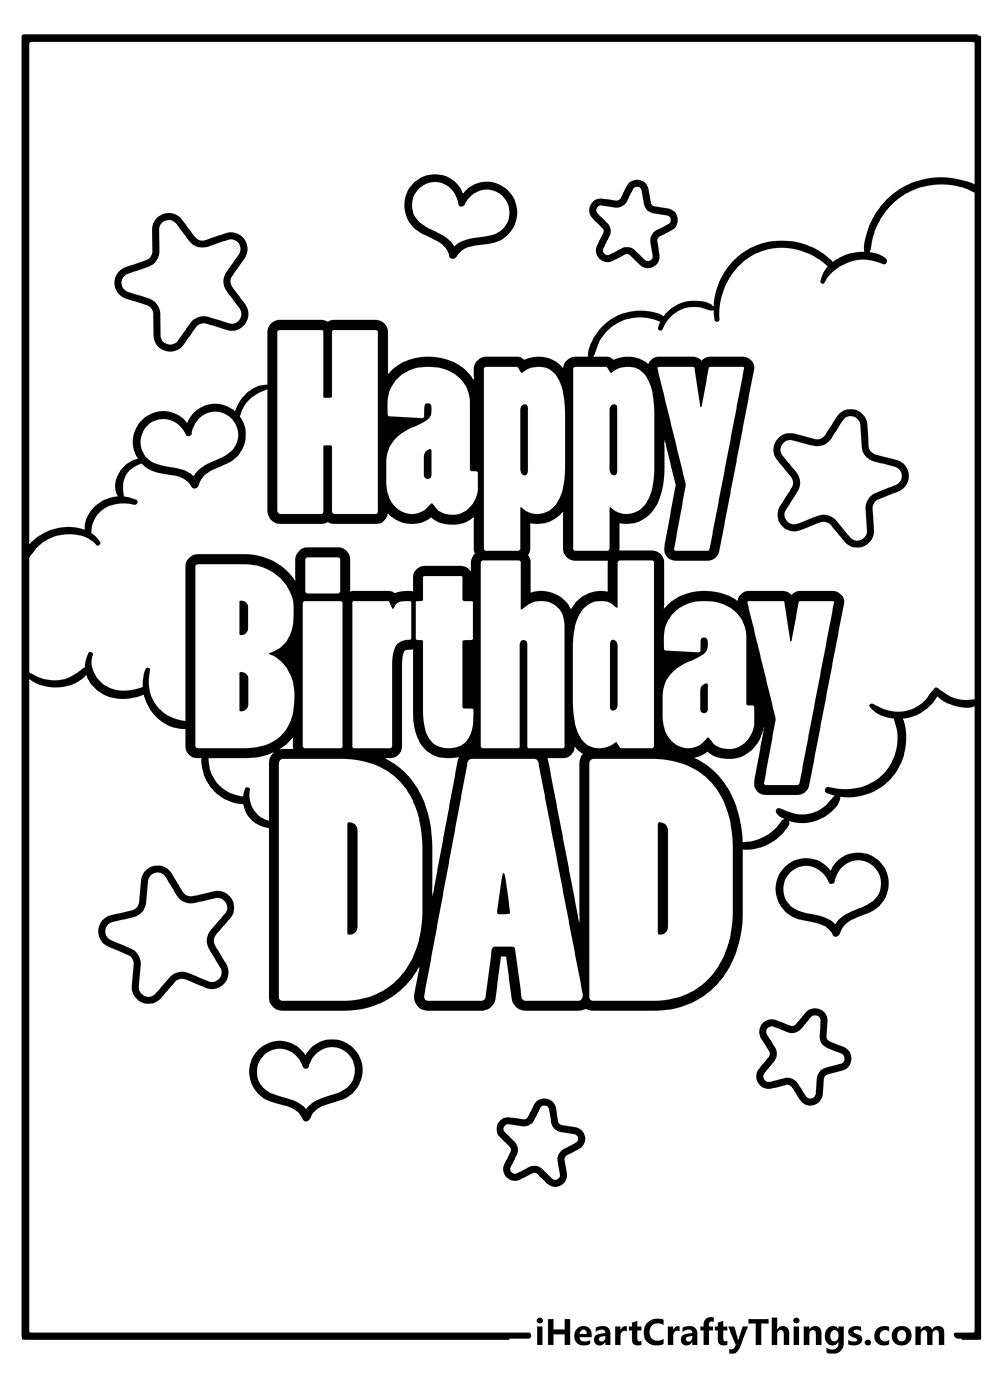 Happy Birthday Dad Coloring Pages for kids free download